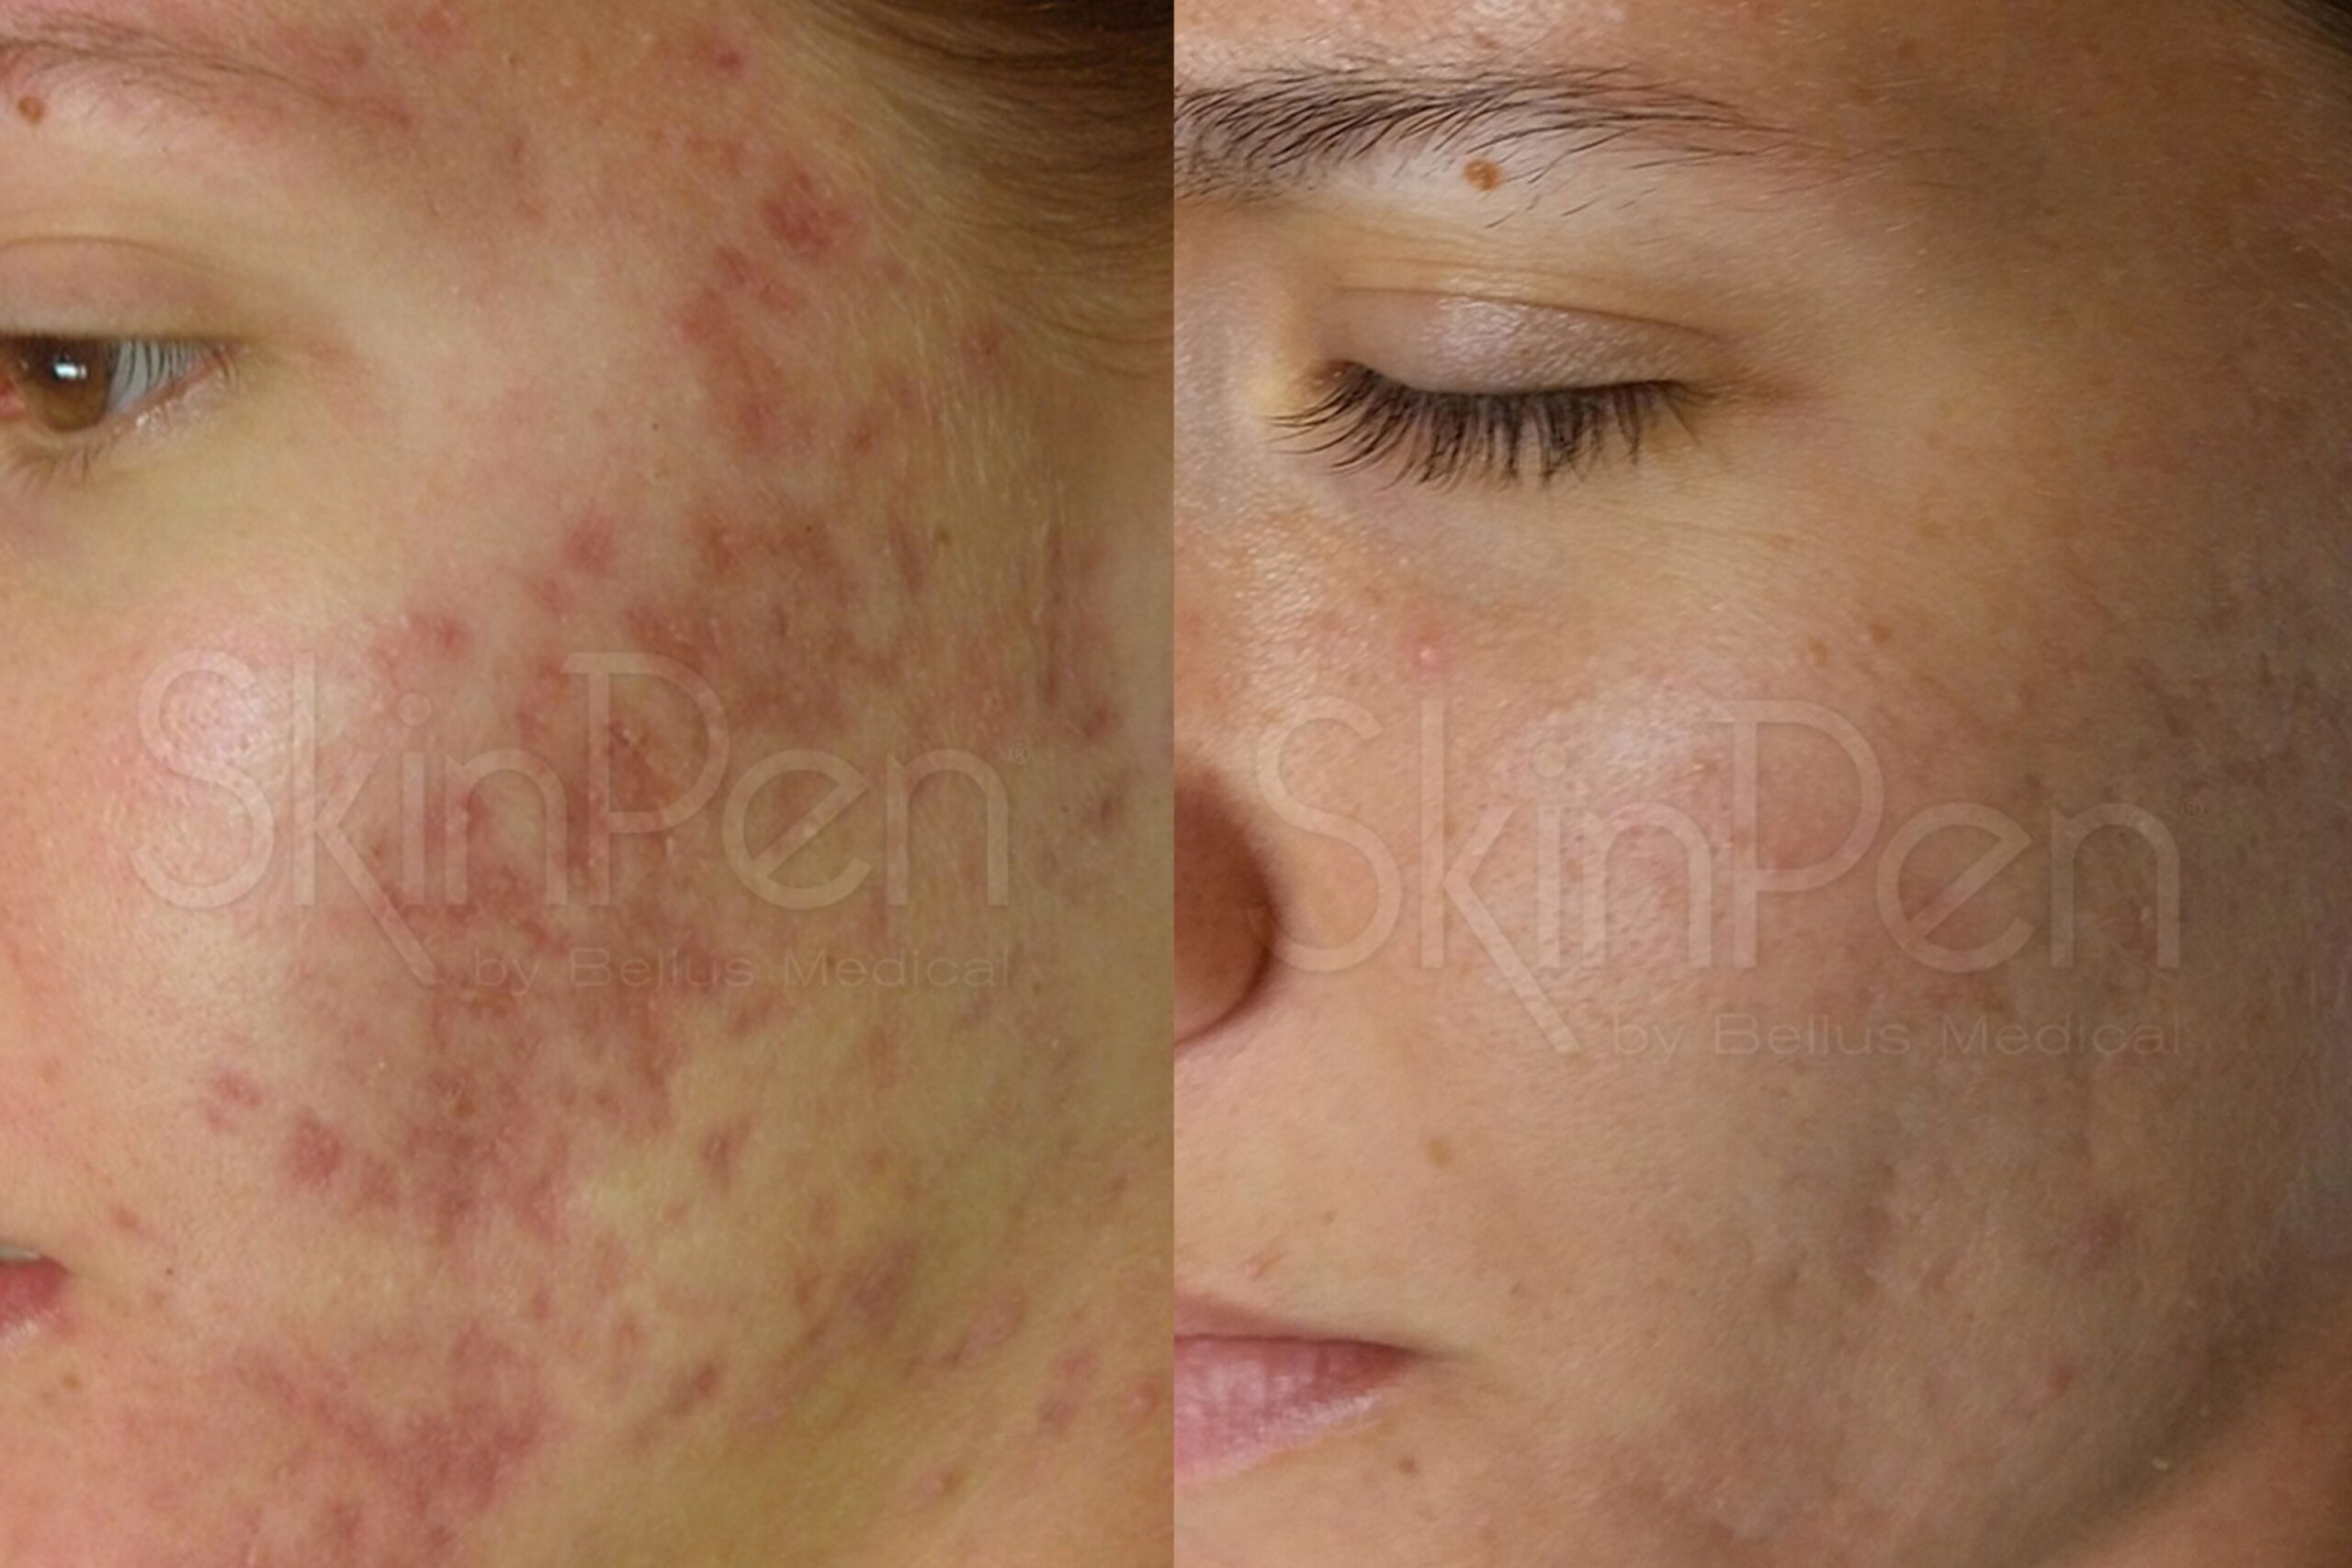 Treatments for acne scarring at Freyja Medical in Wrexham, Nantwich and Cheshire